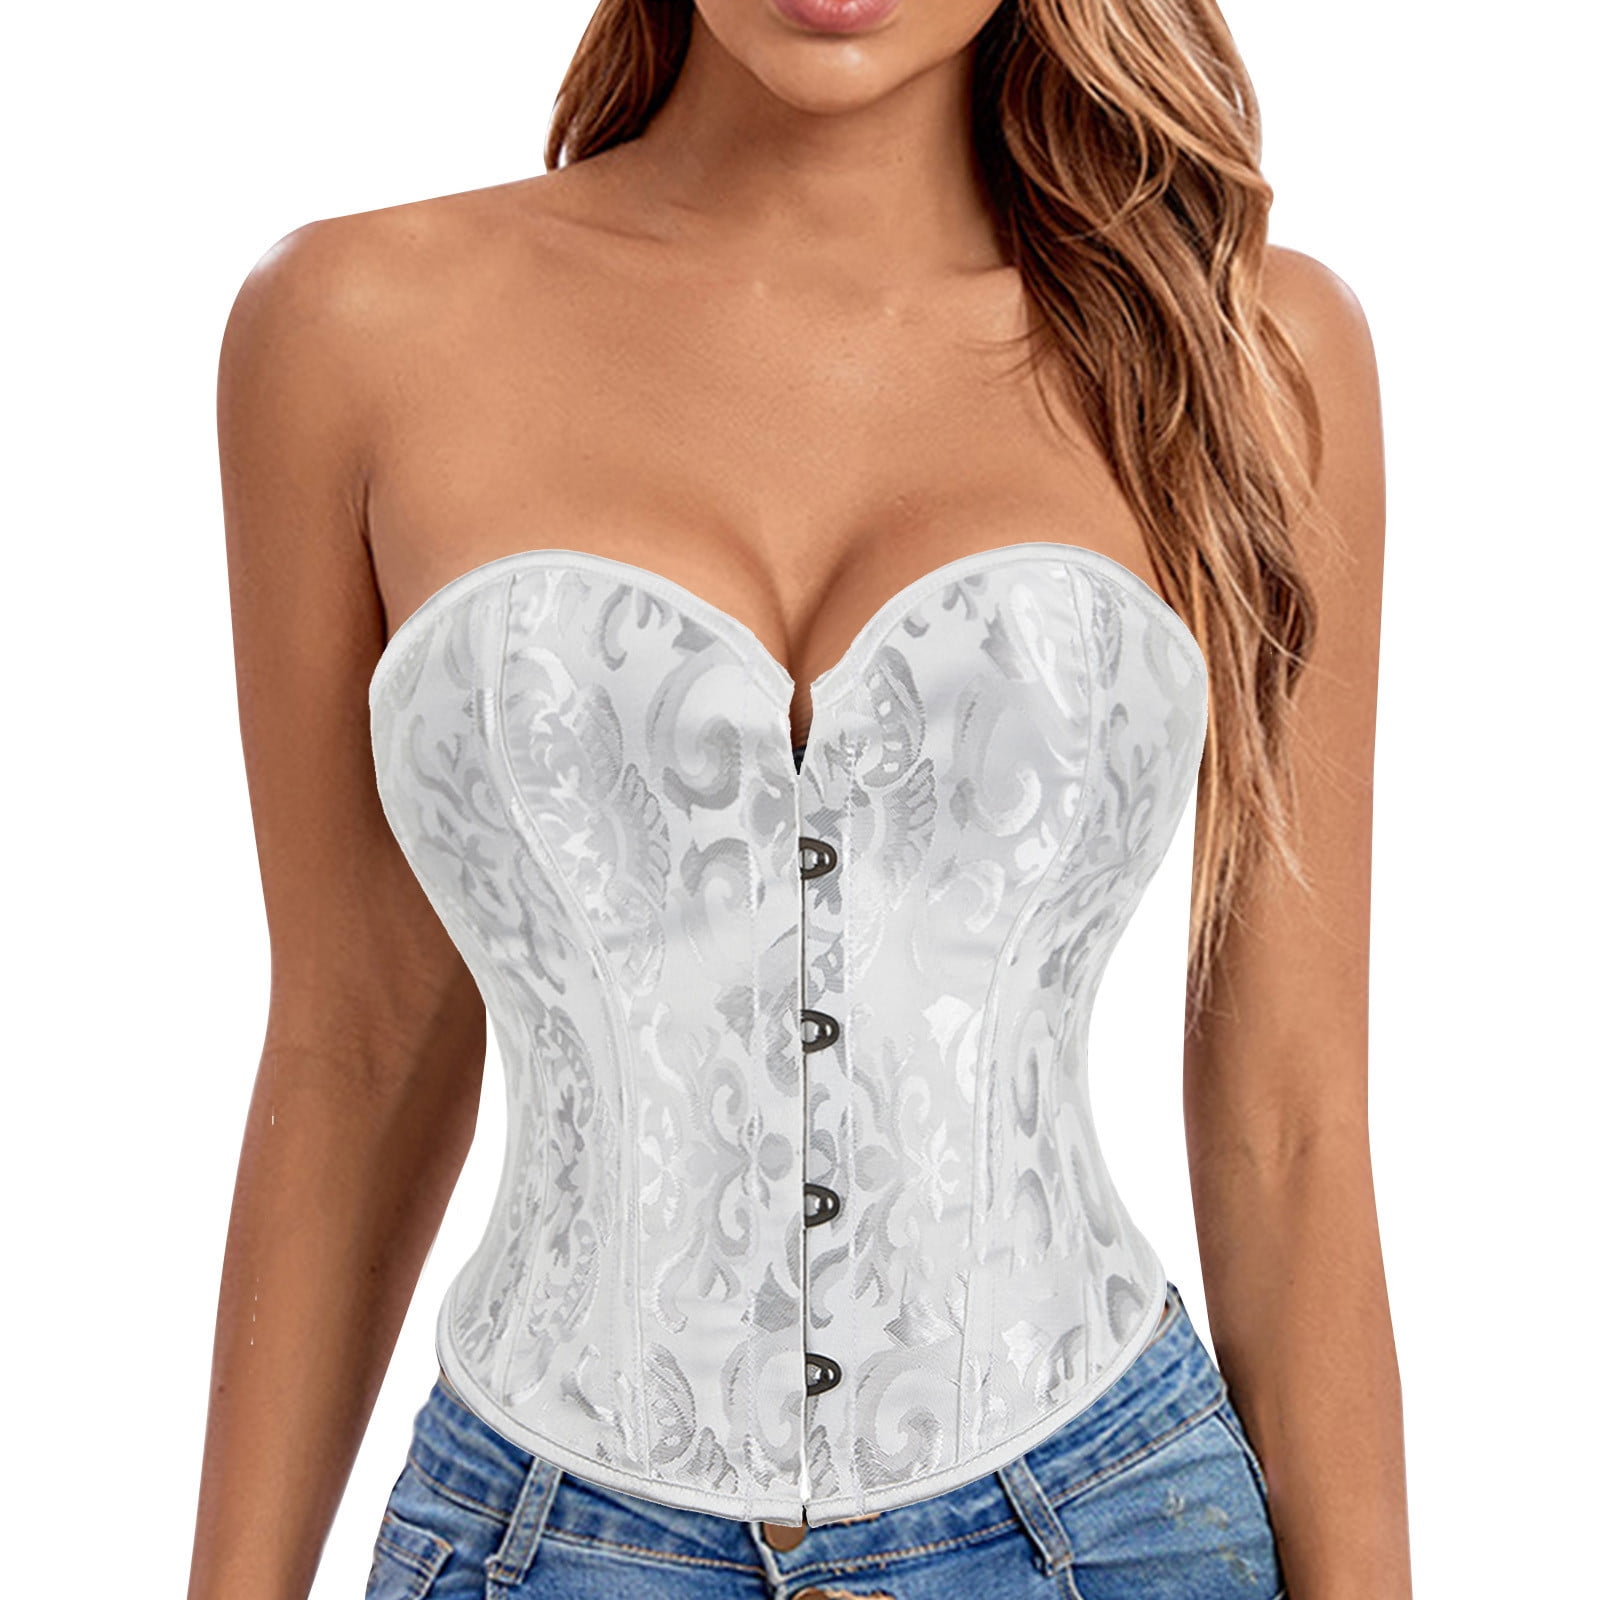 YouLoveIt Women Push Up Shapewear Overbust Corset Bustier Plus Size Lace-up  Busiter Shapewear Waist Training Corsets Bustier Top Corselet for Cocktail  Dresses with G-string 